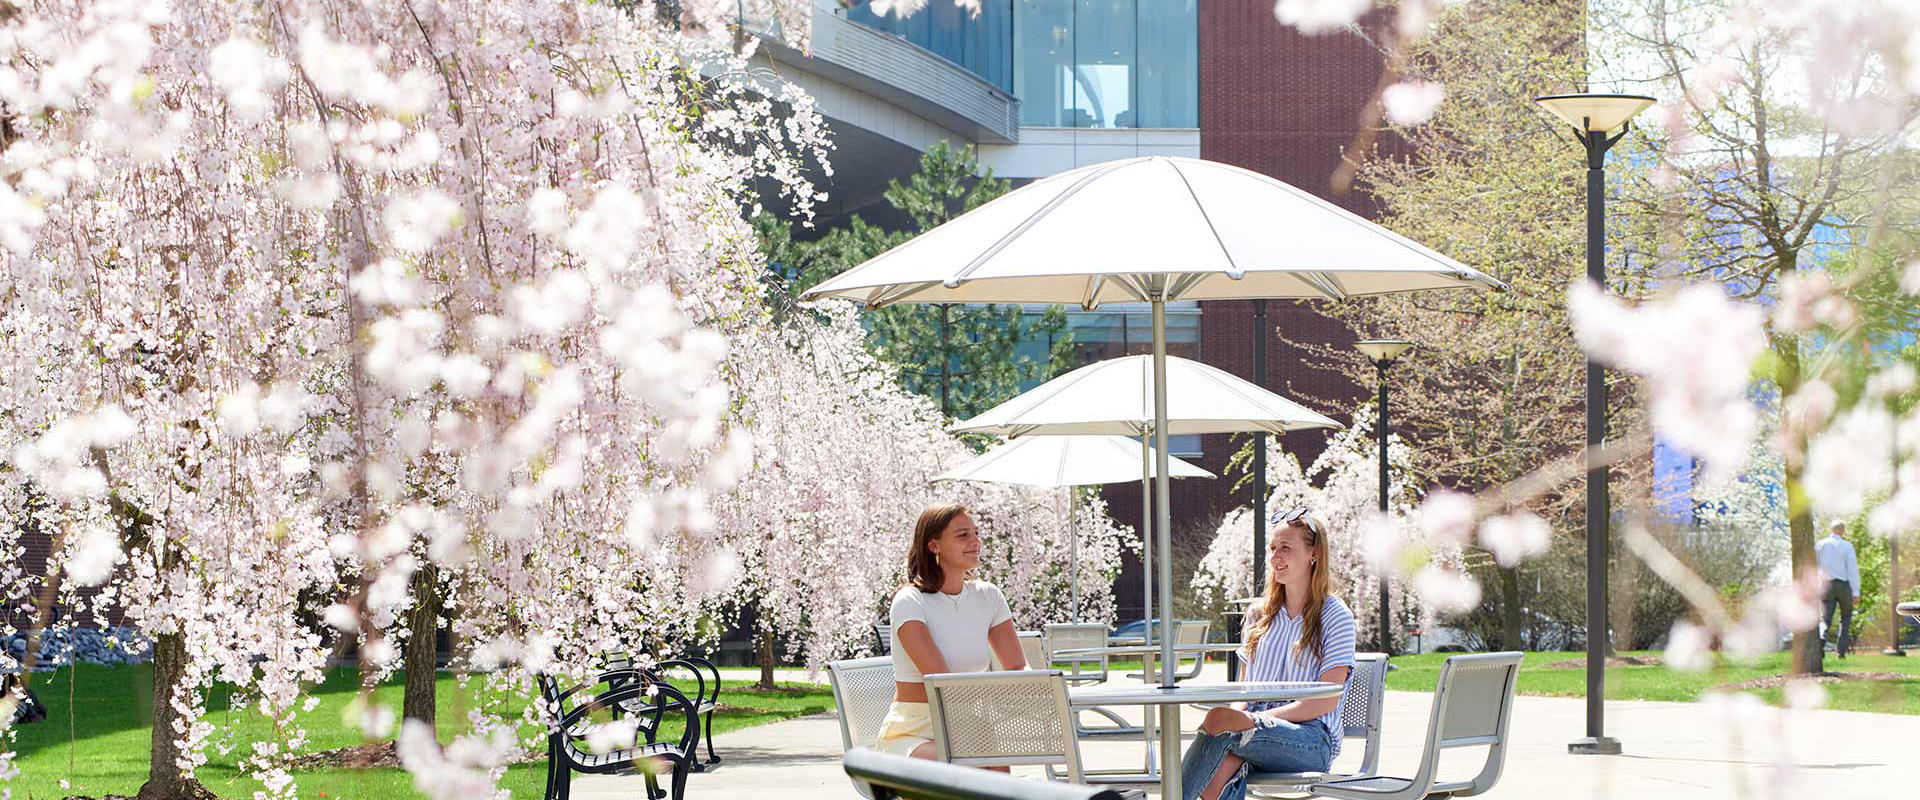 Students visit under blossoming trees next to the IST building